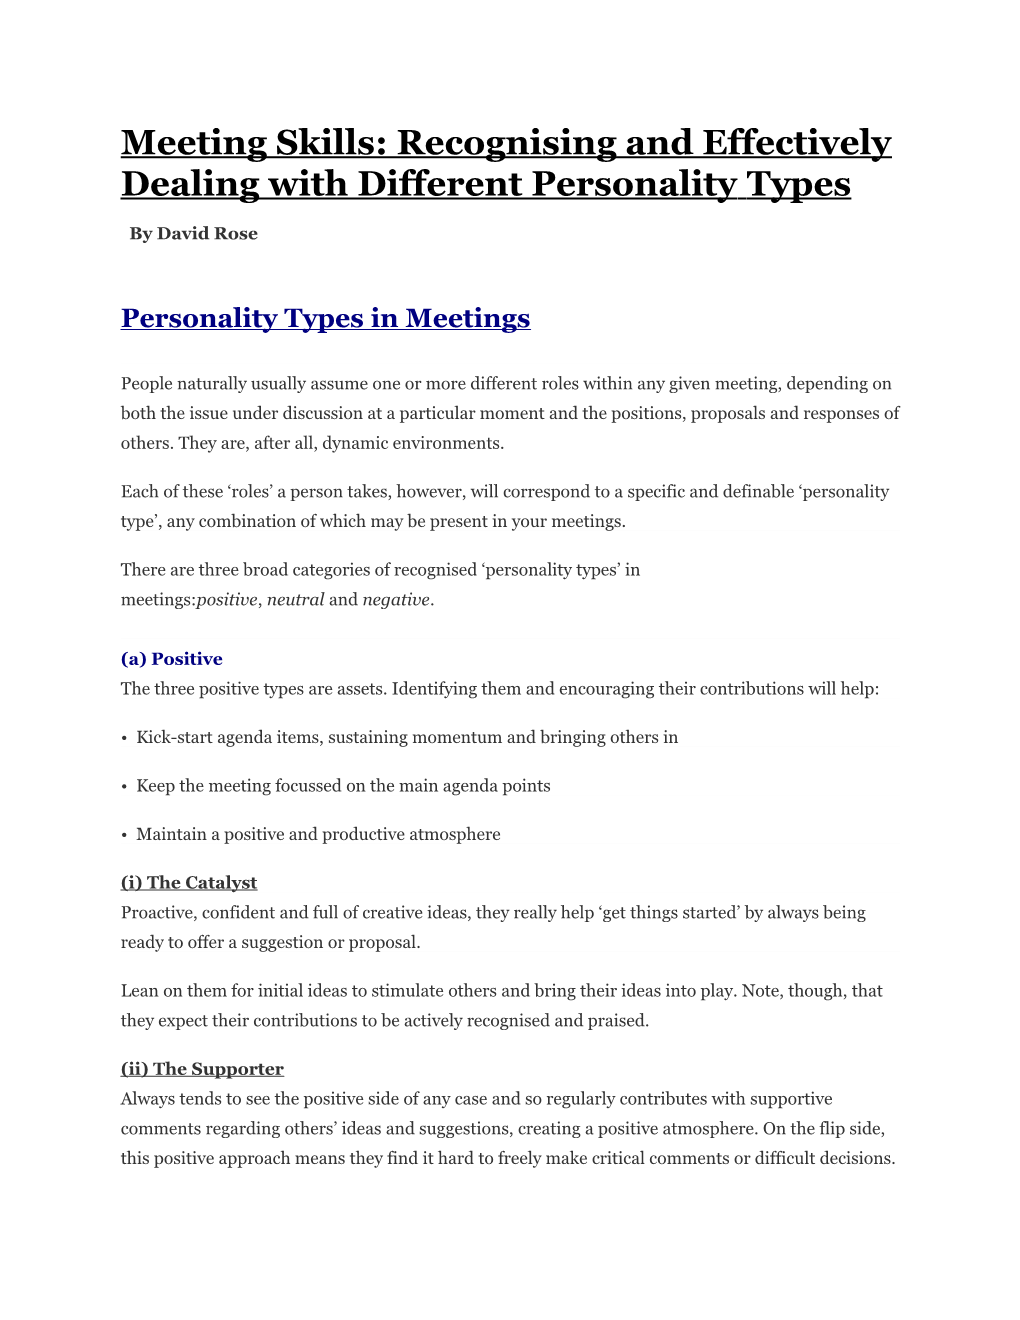 Meeting Skills: Recognising and Effectively Dealing with Different Personalitytypes